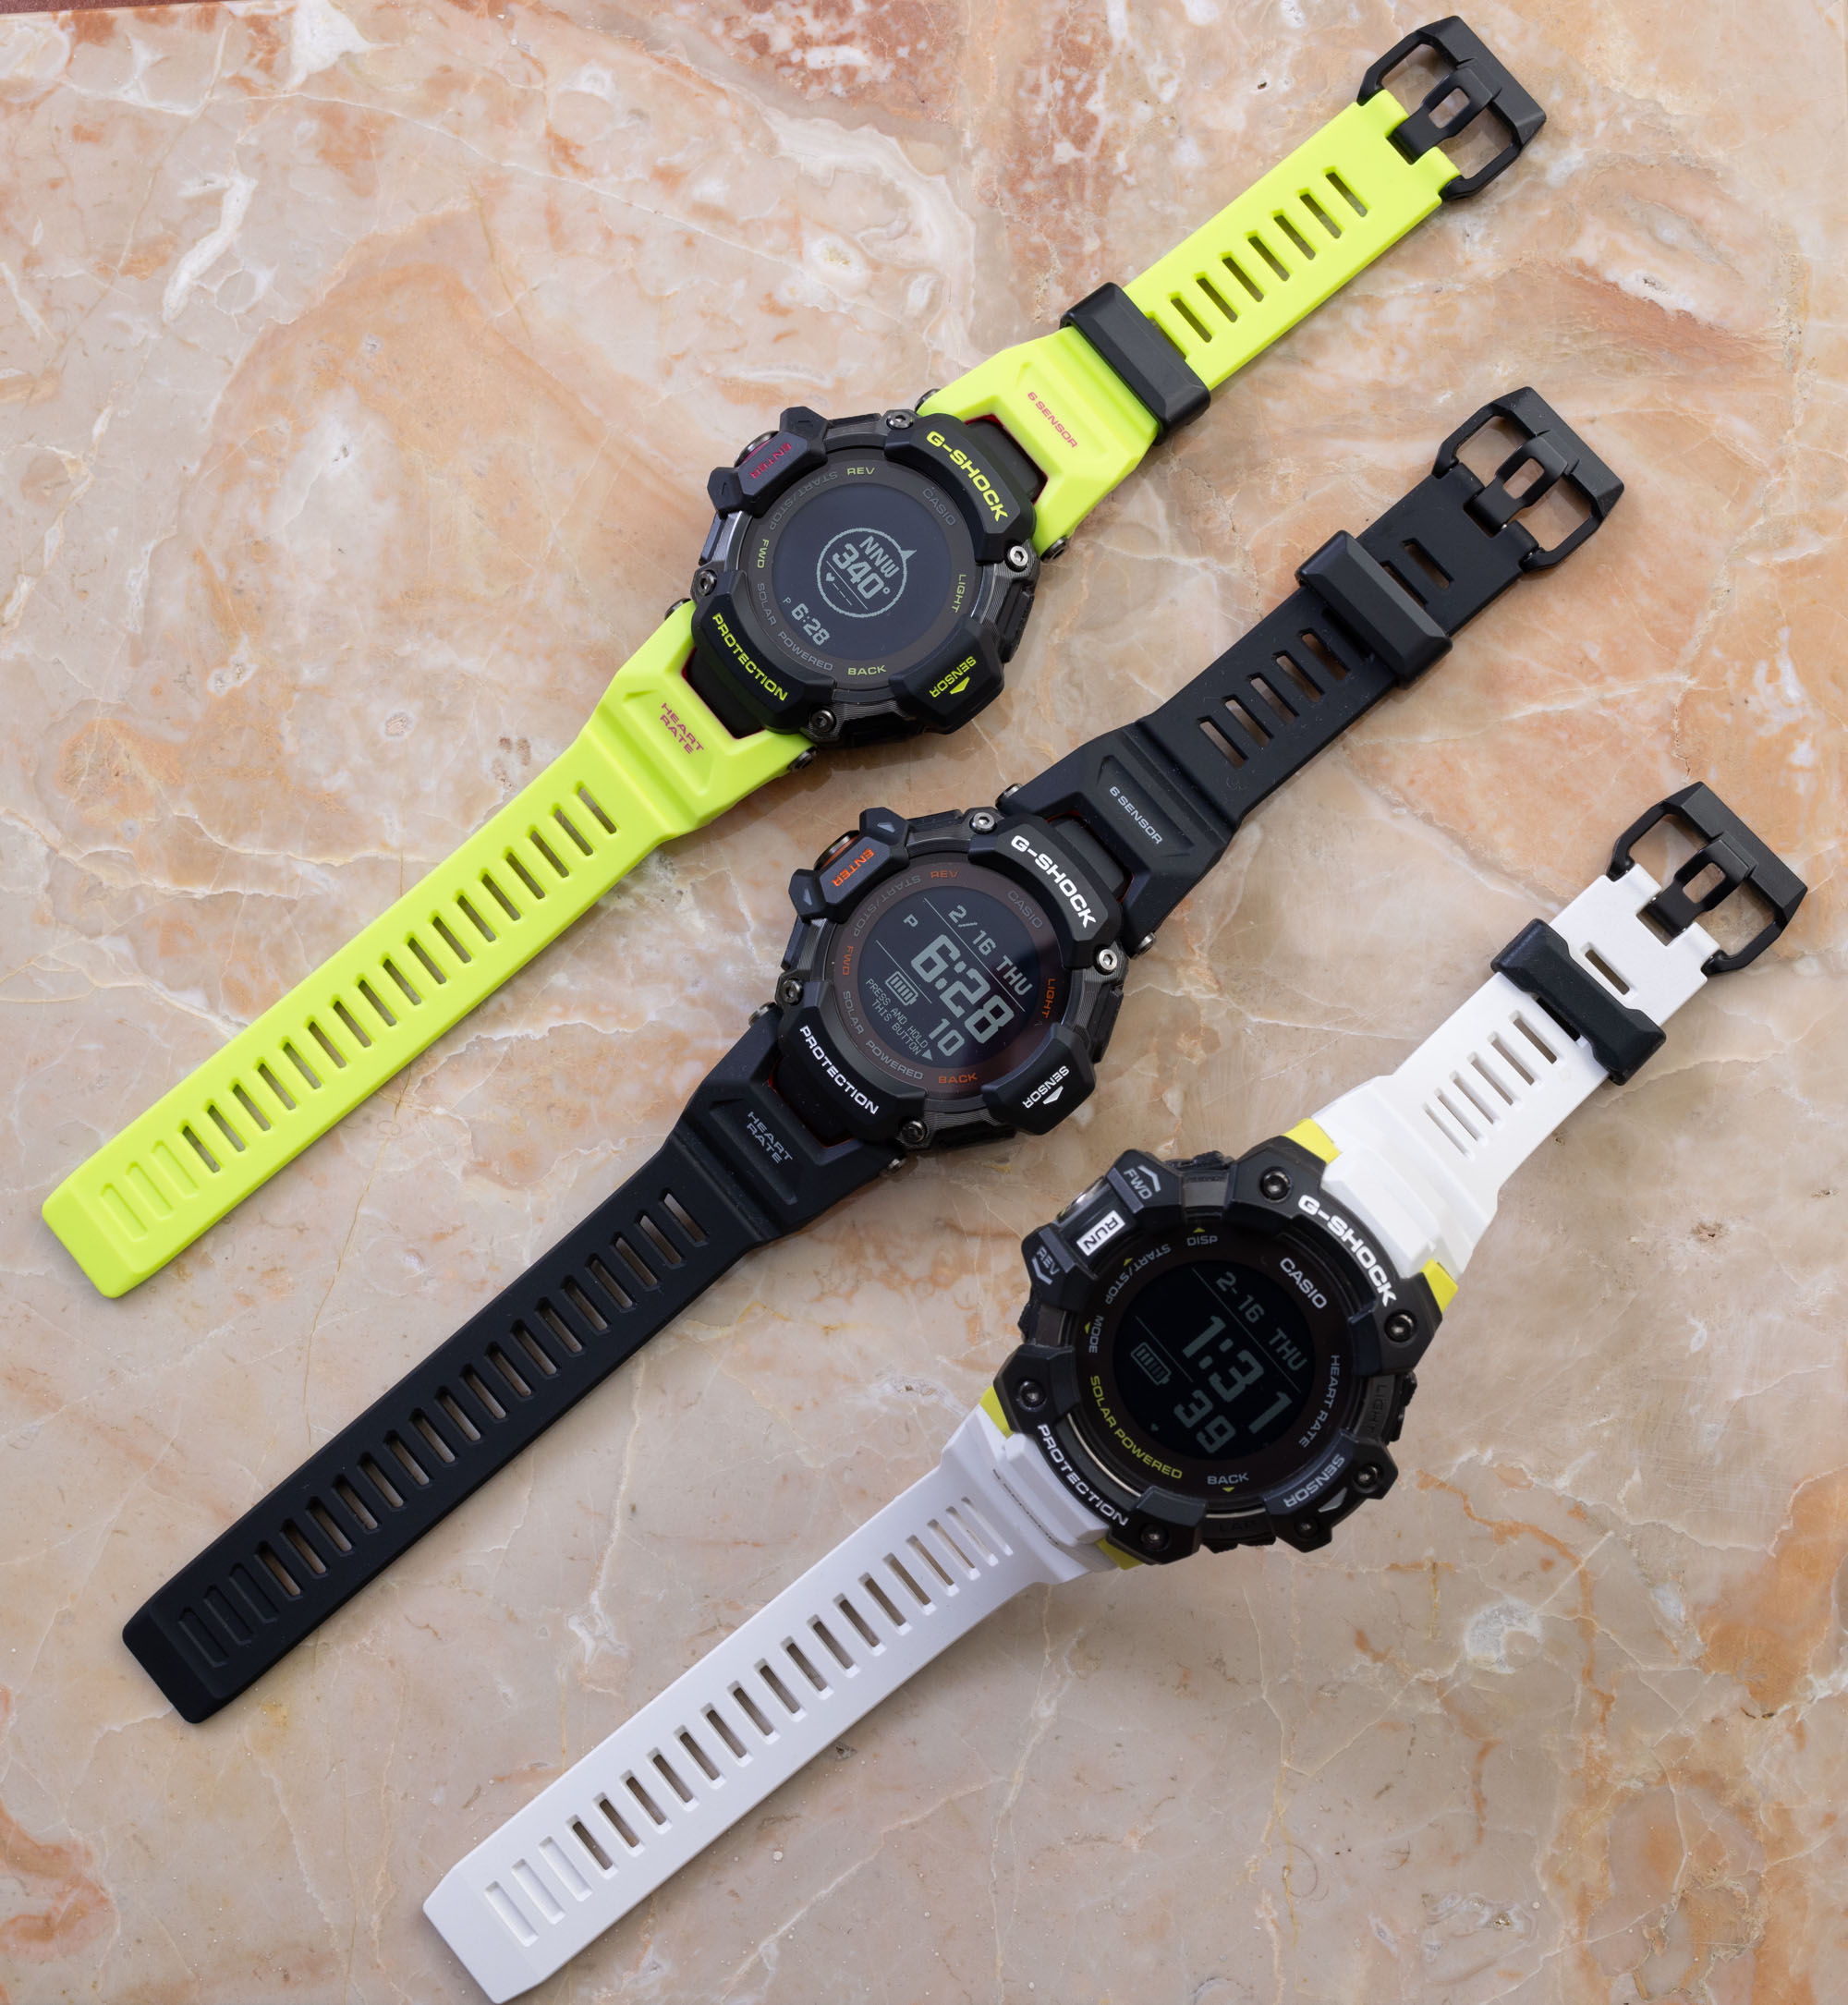 Watch Review: Casio G-Shock Move GBD-H2000 aBlogtoWatch Smart Activity Tracker 